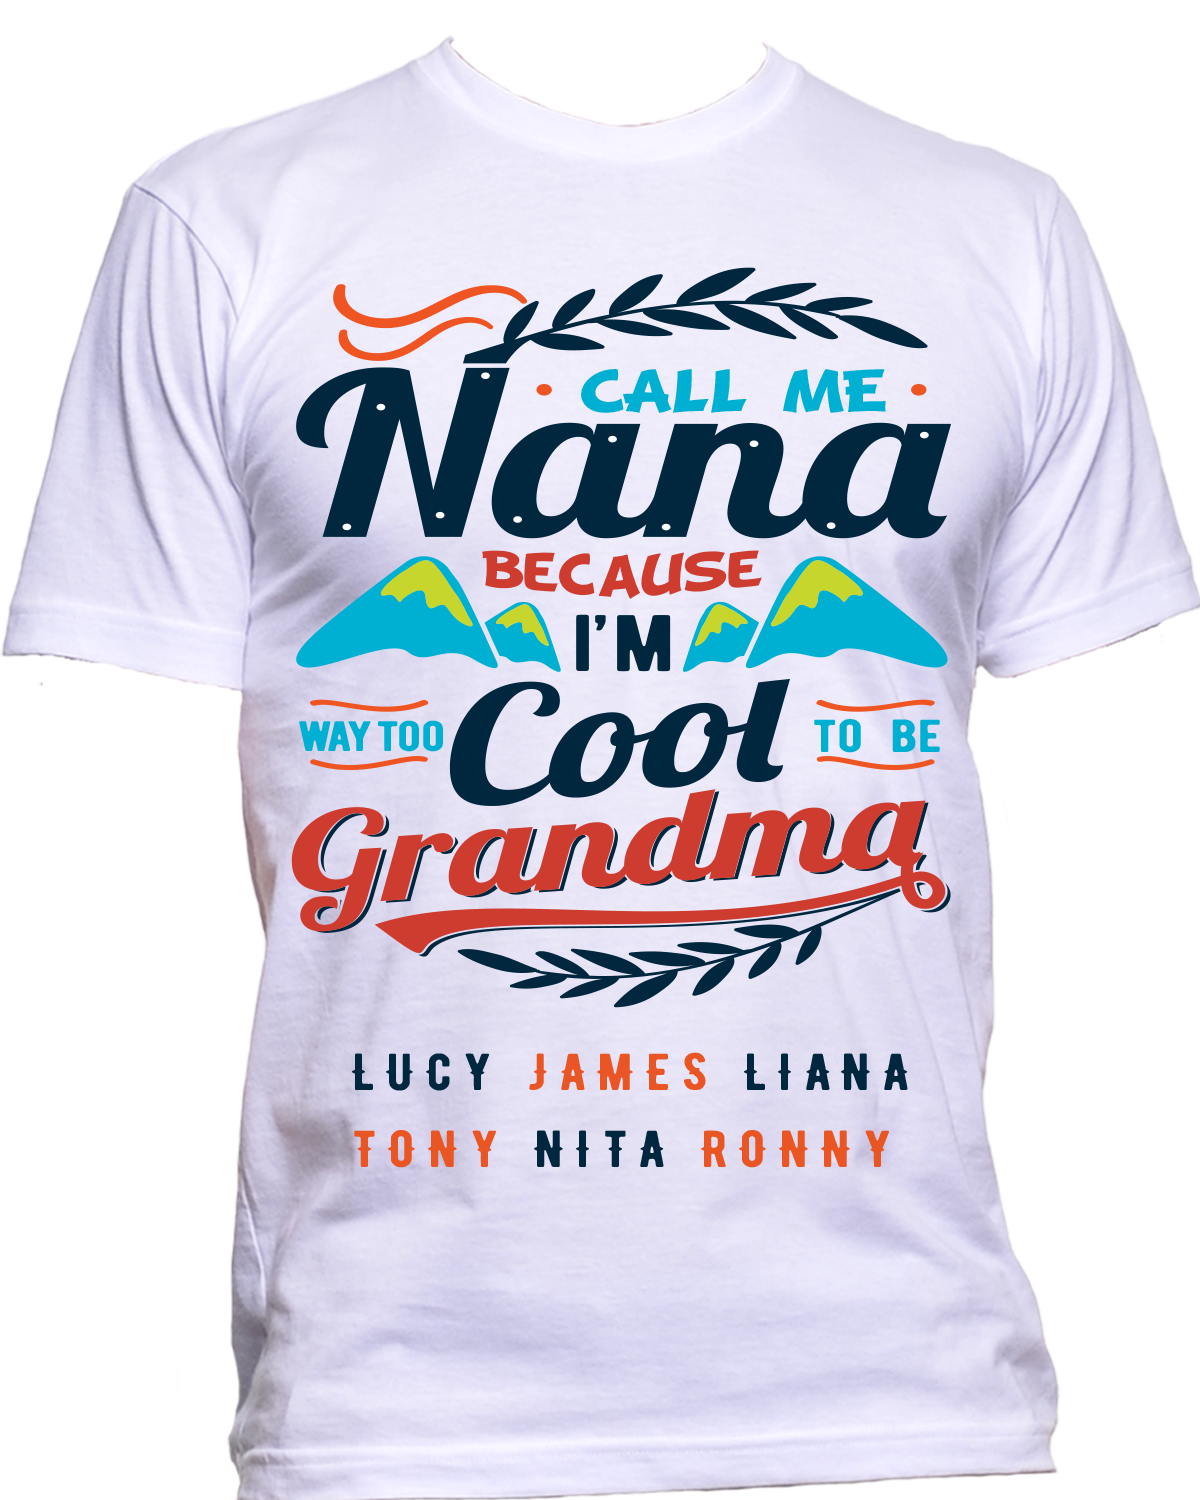 Call me Nana/Grandma Because I am way too cool T-Shirts Hoodies Special Price $19.99 Today Only